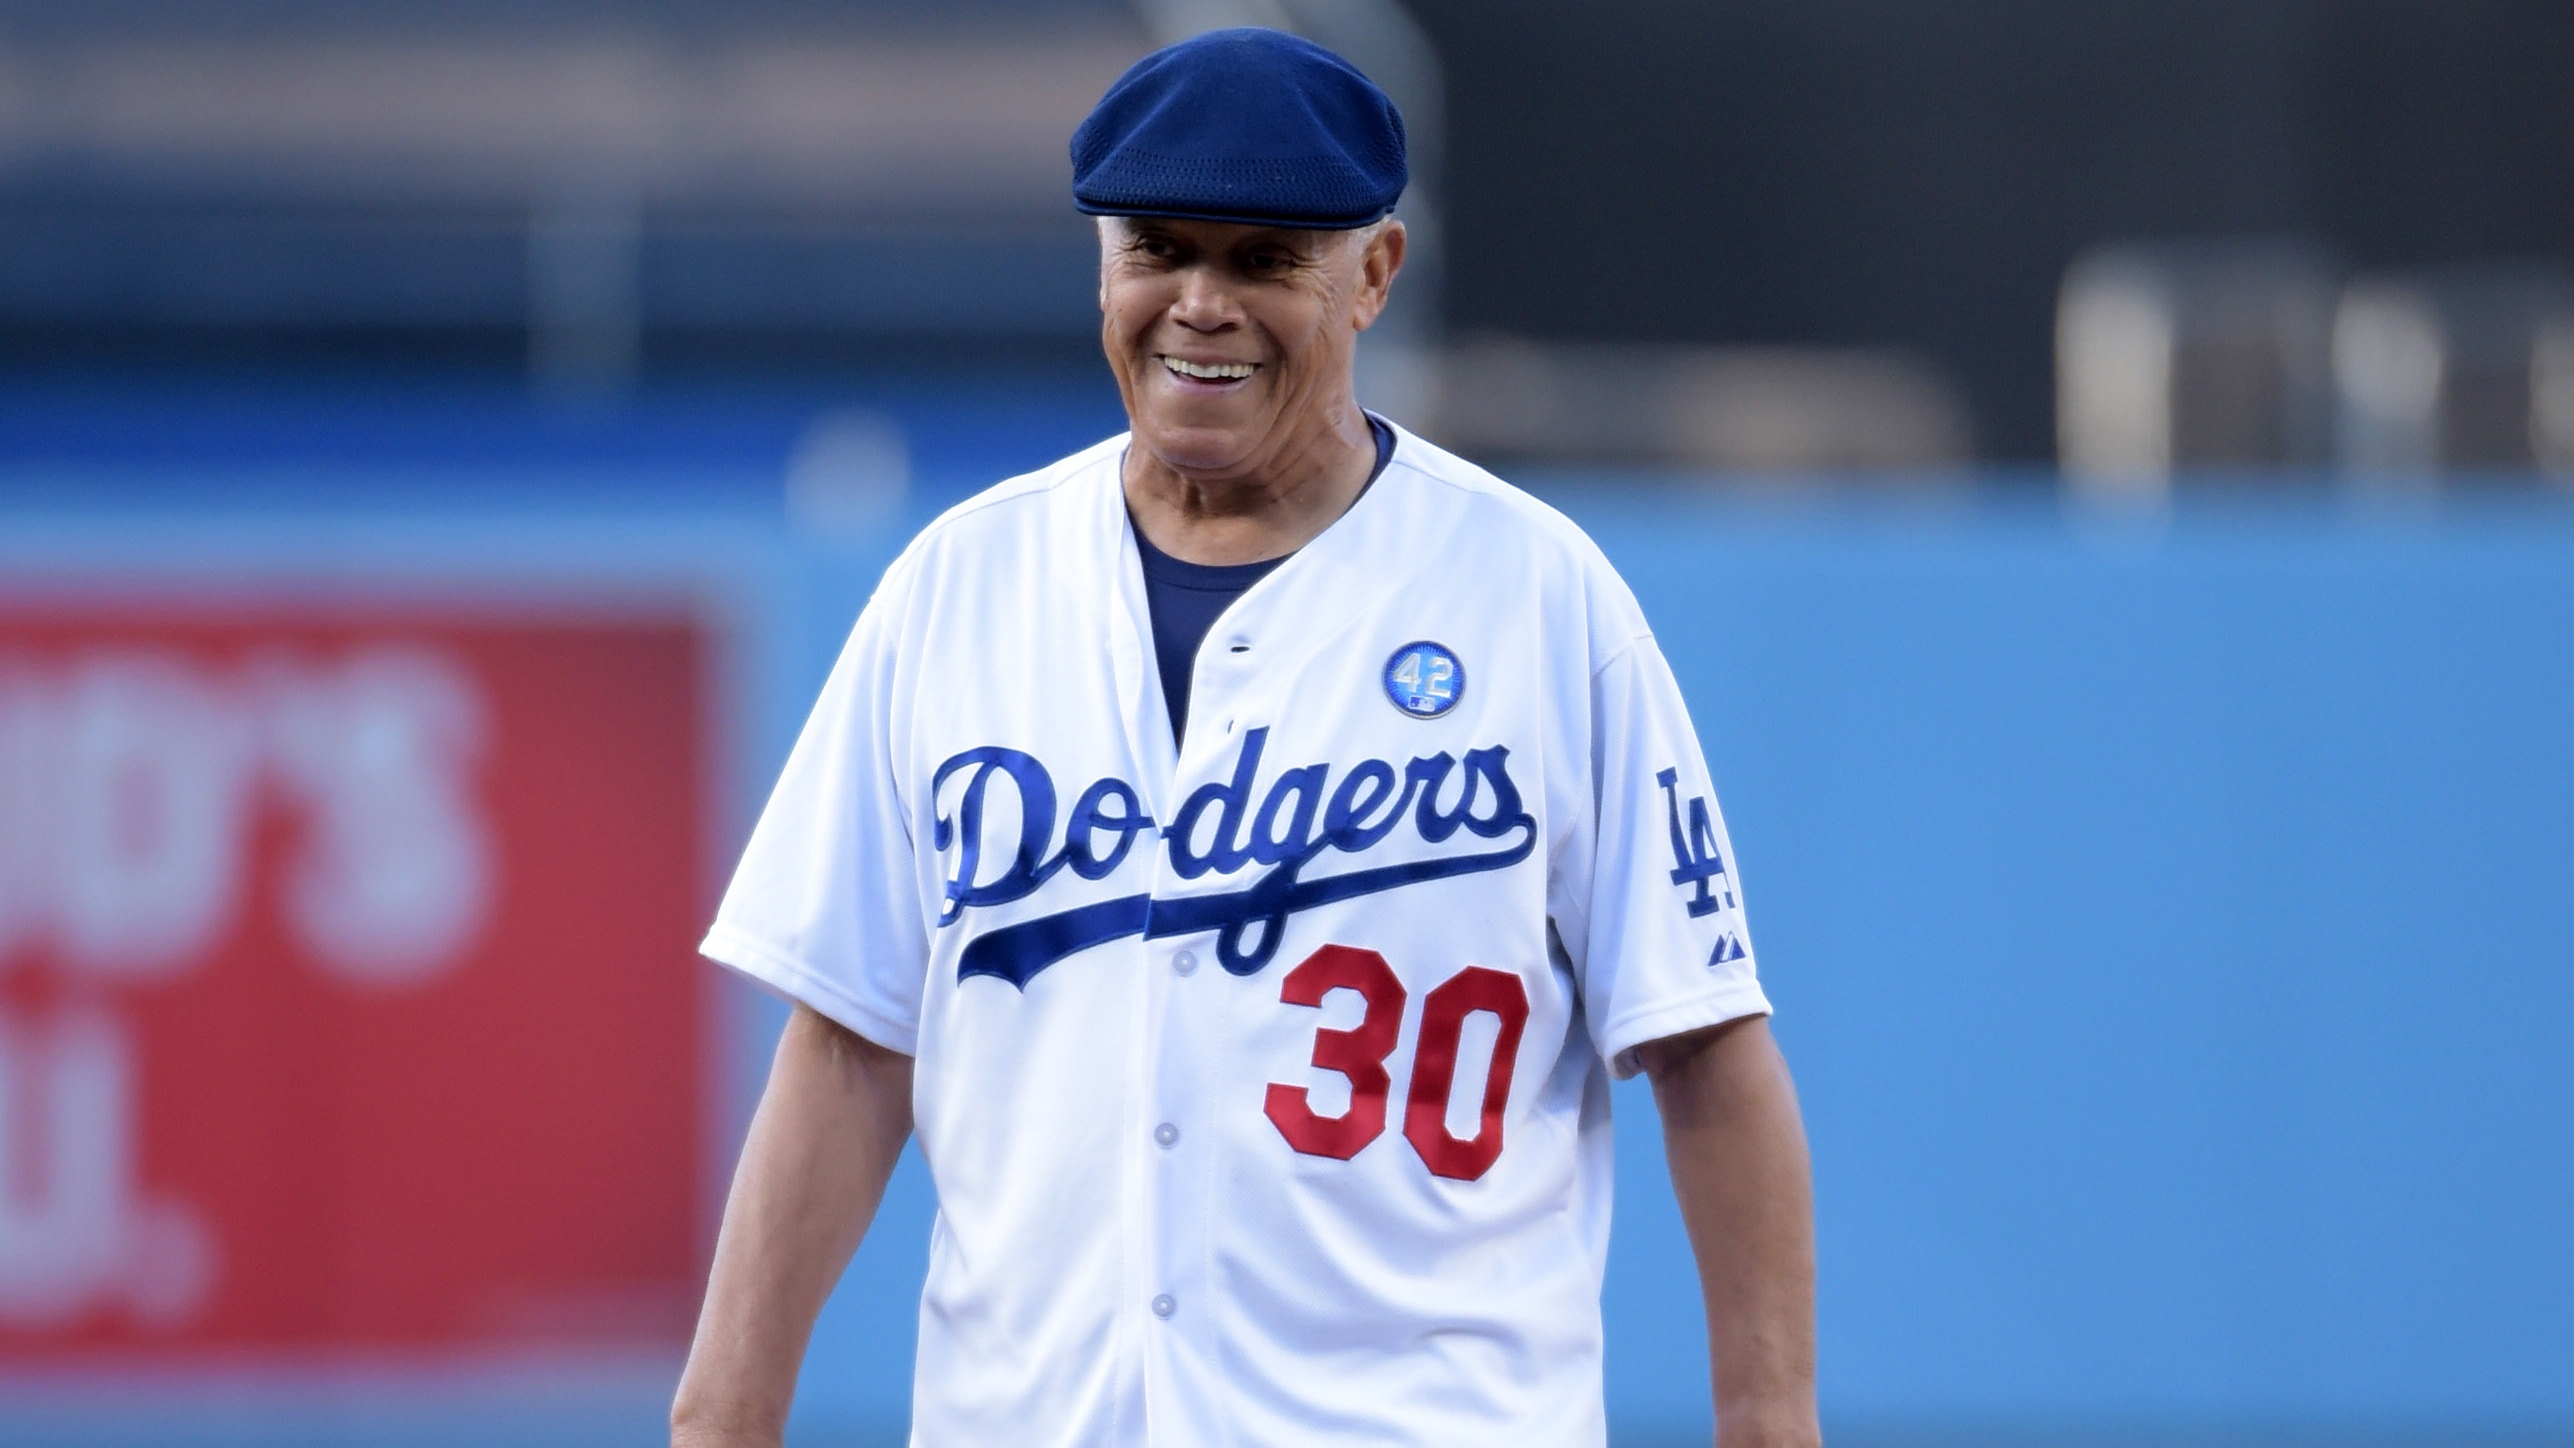 Dodgers Dugout exclusive: Maury Wills thanks fans, Dodgers for his special  night - Los Angeles Times